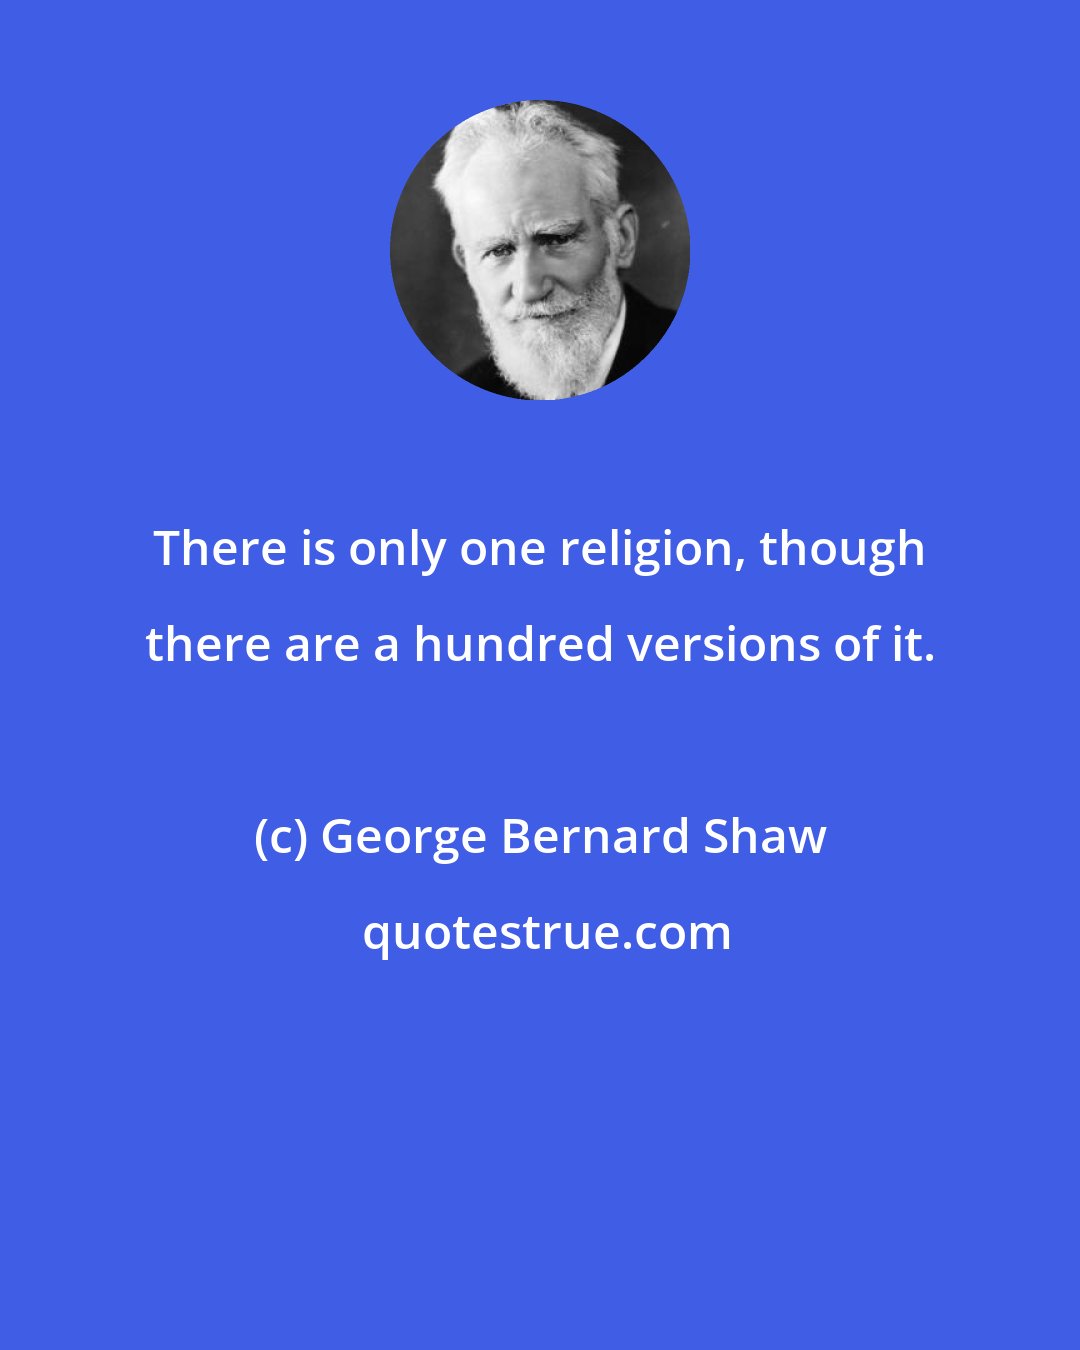 George Bernard Shaw: There is only one religion, though there are a hundred versions of it.